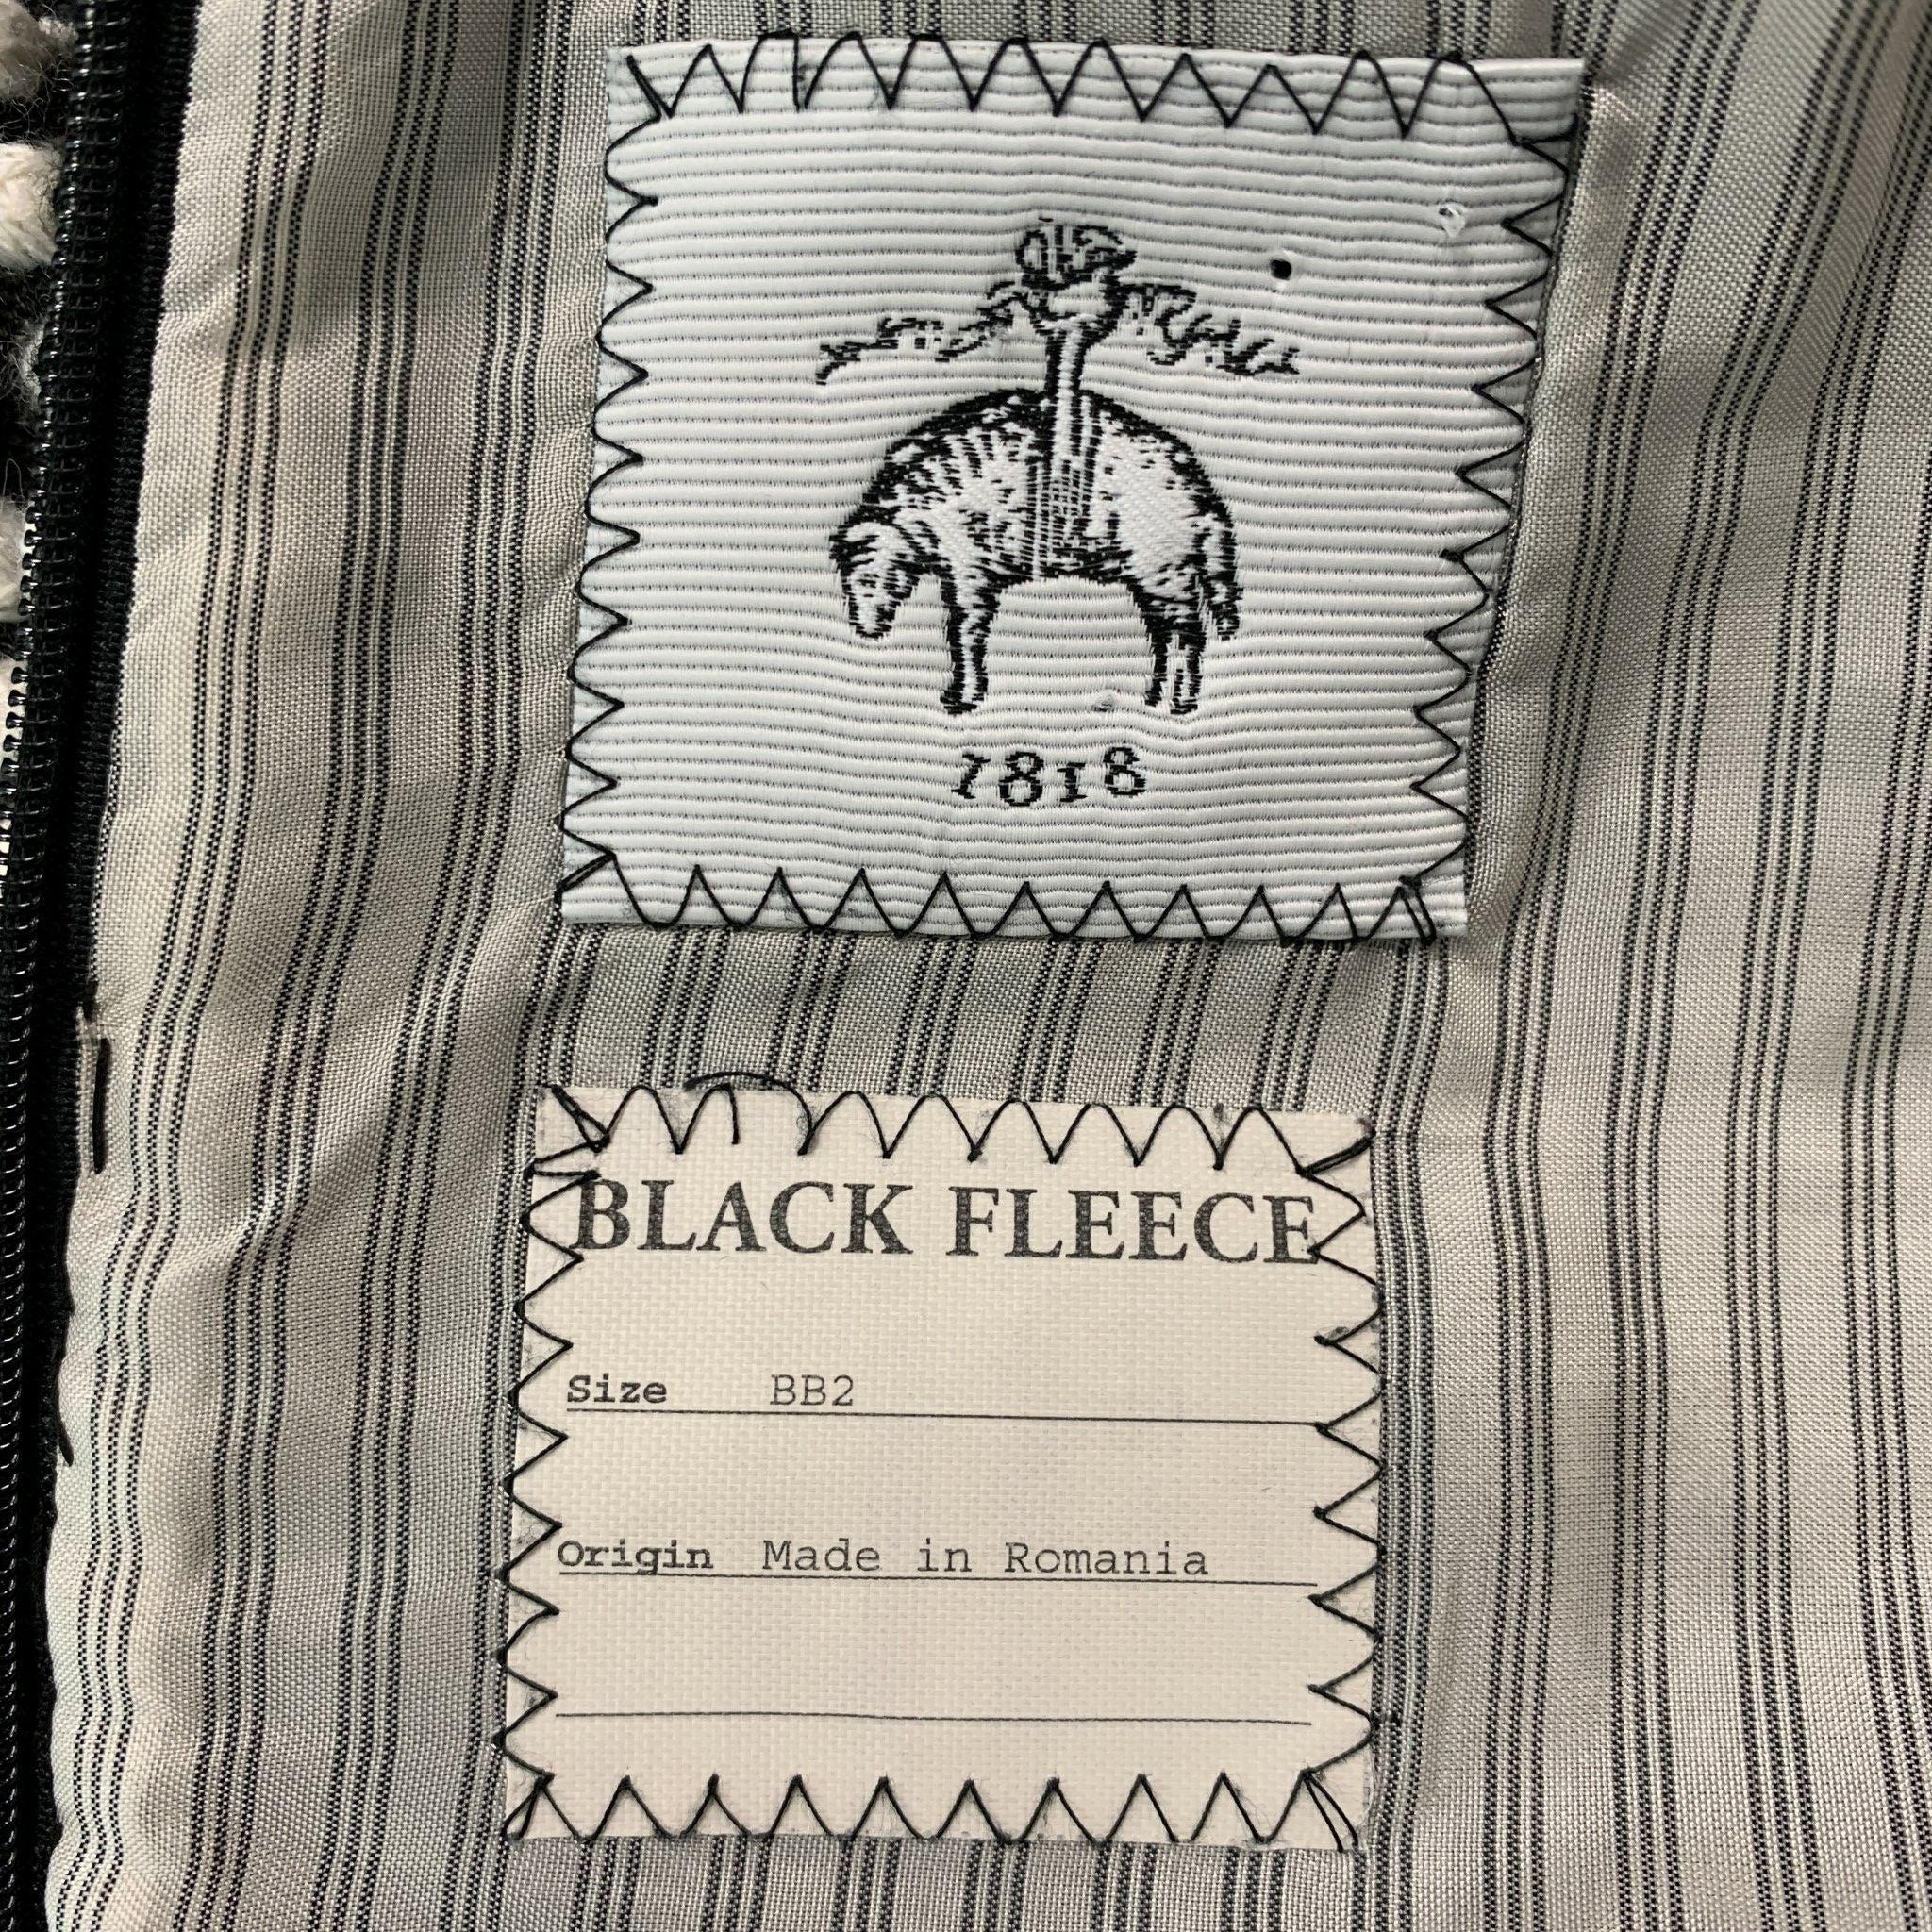 BLACK FLEECE Size M Textured Black White Wool Blend Dress In Good Condition For Sale In San Francisco, CA